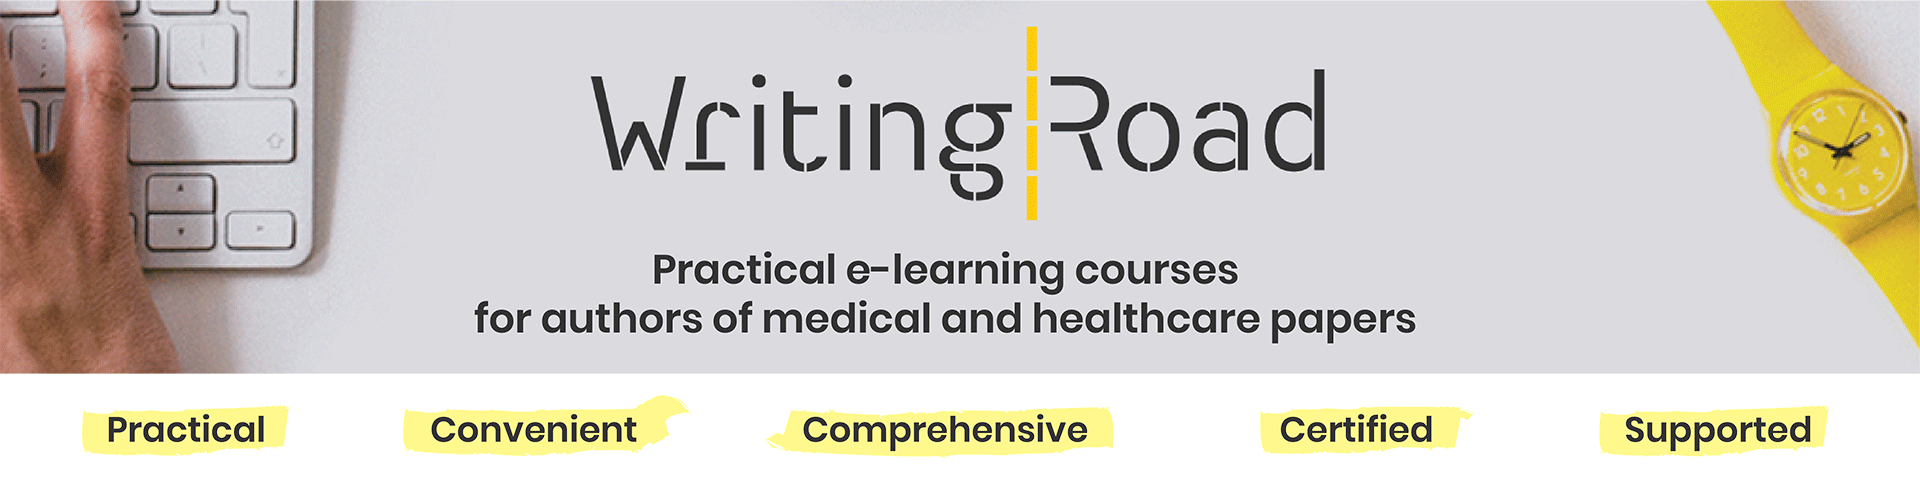 Practical e-learning courses for medicine and healthcare